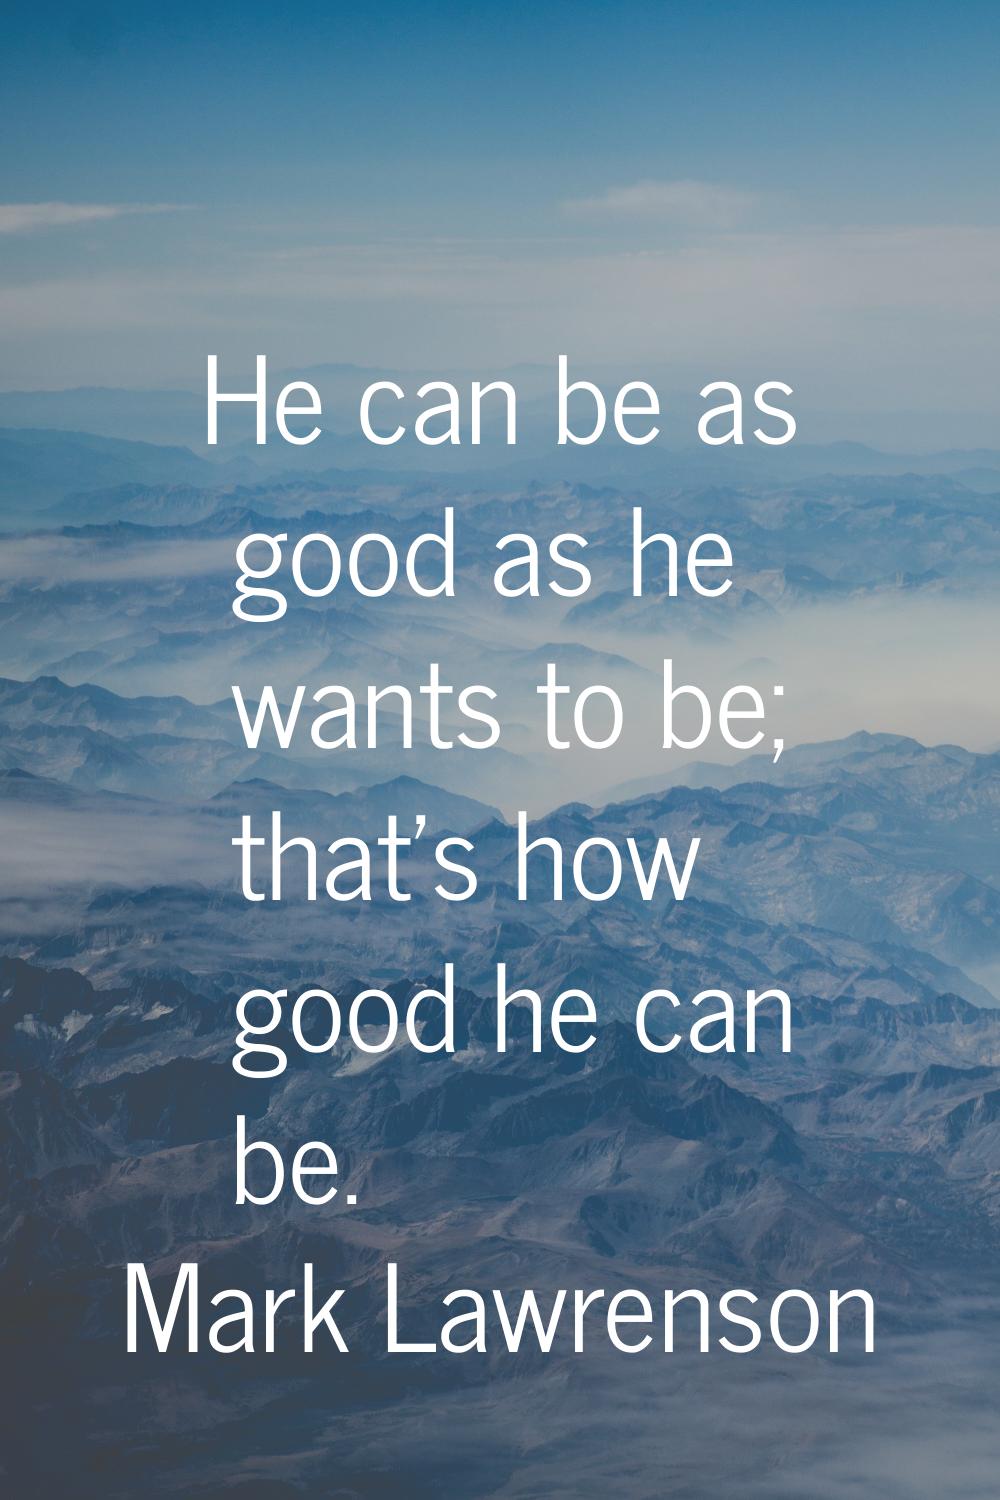 He can be as good as he wants to be; that's how good he can be.